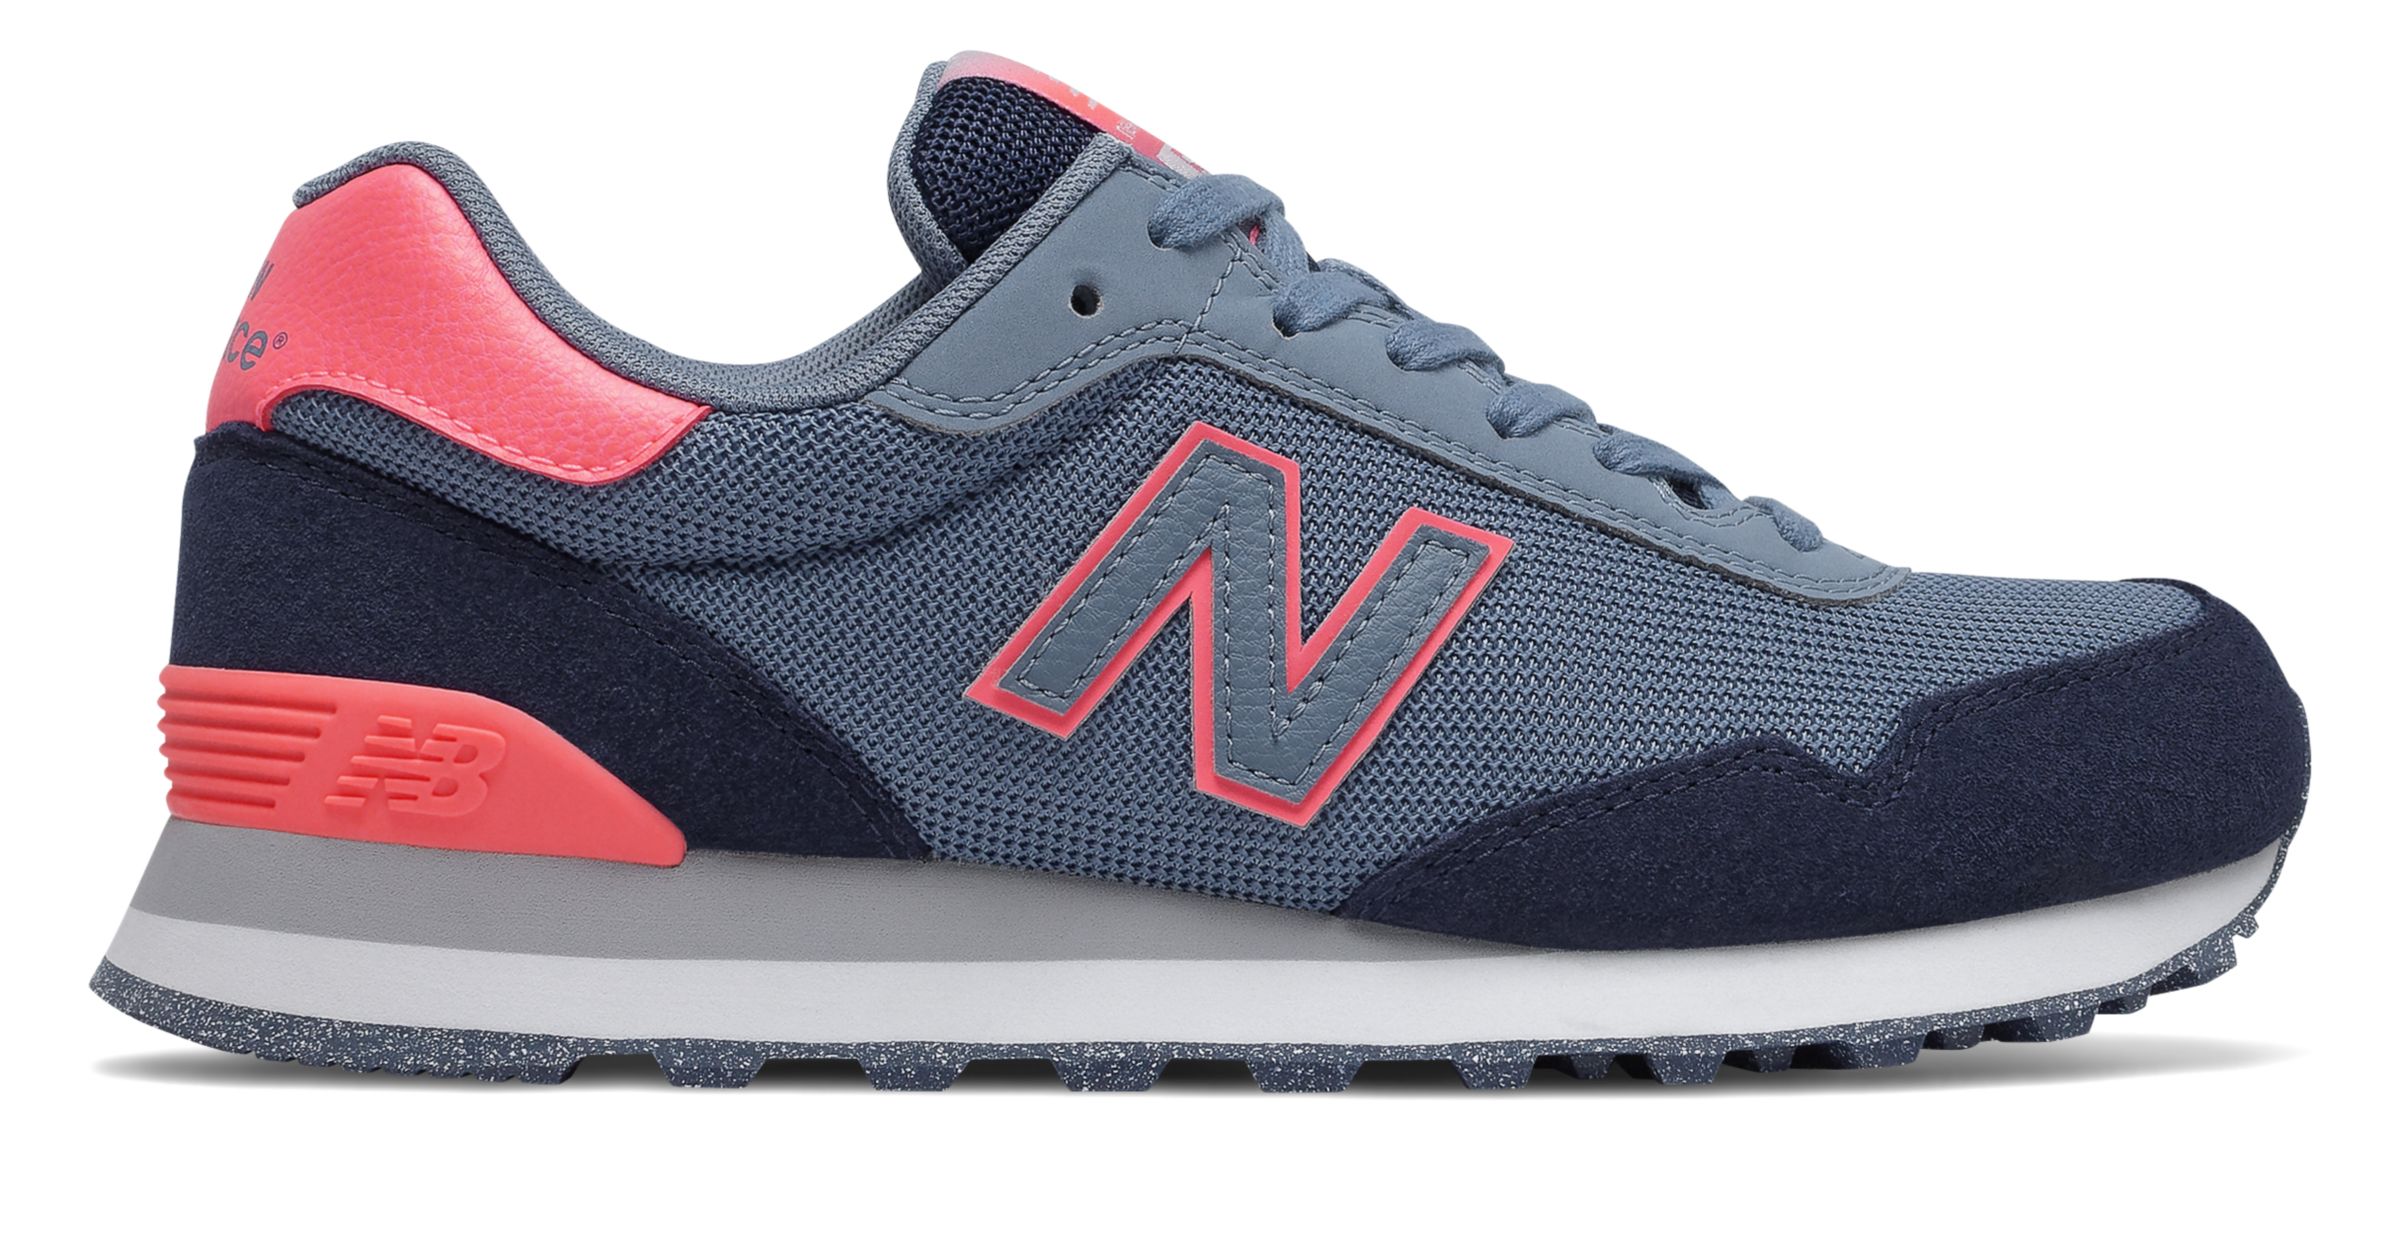 new balance 515 rosa Online Shopping mall | Find the best prices ...